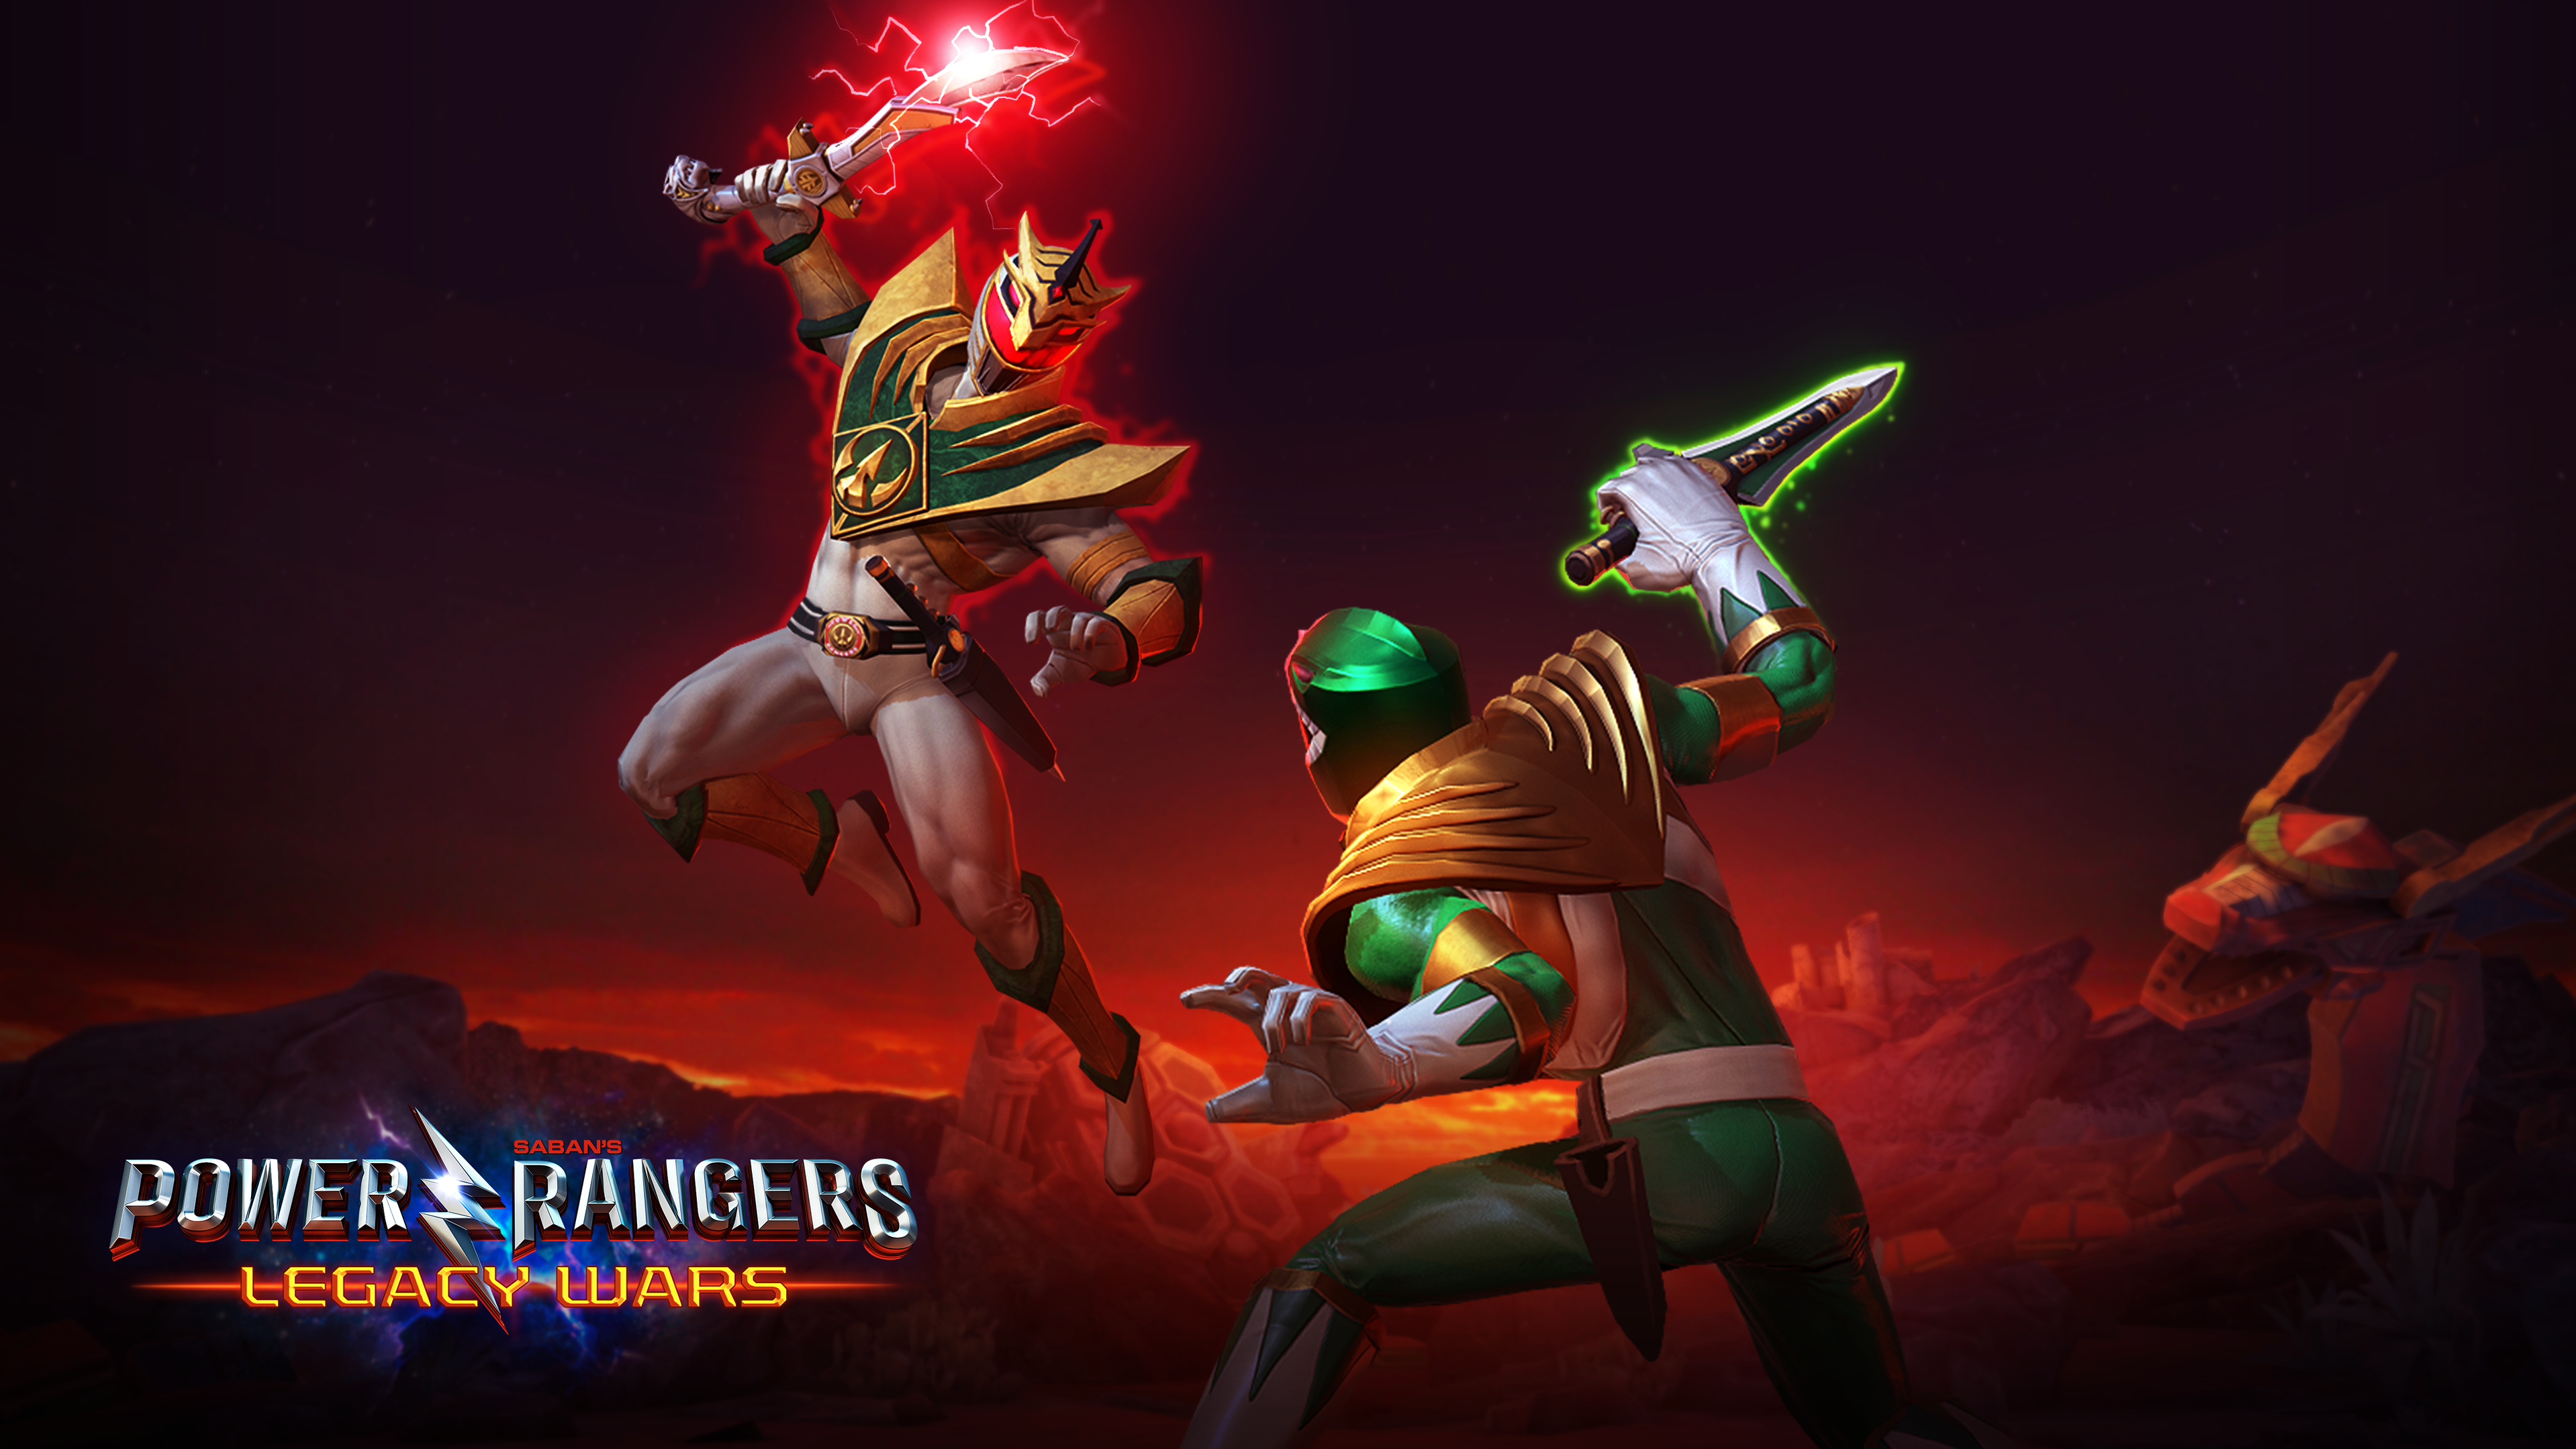 wallpapers power rangers,action adventure game,pc game,games,fictional character,screenshot